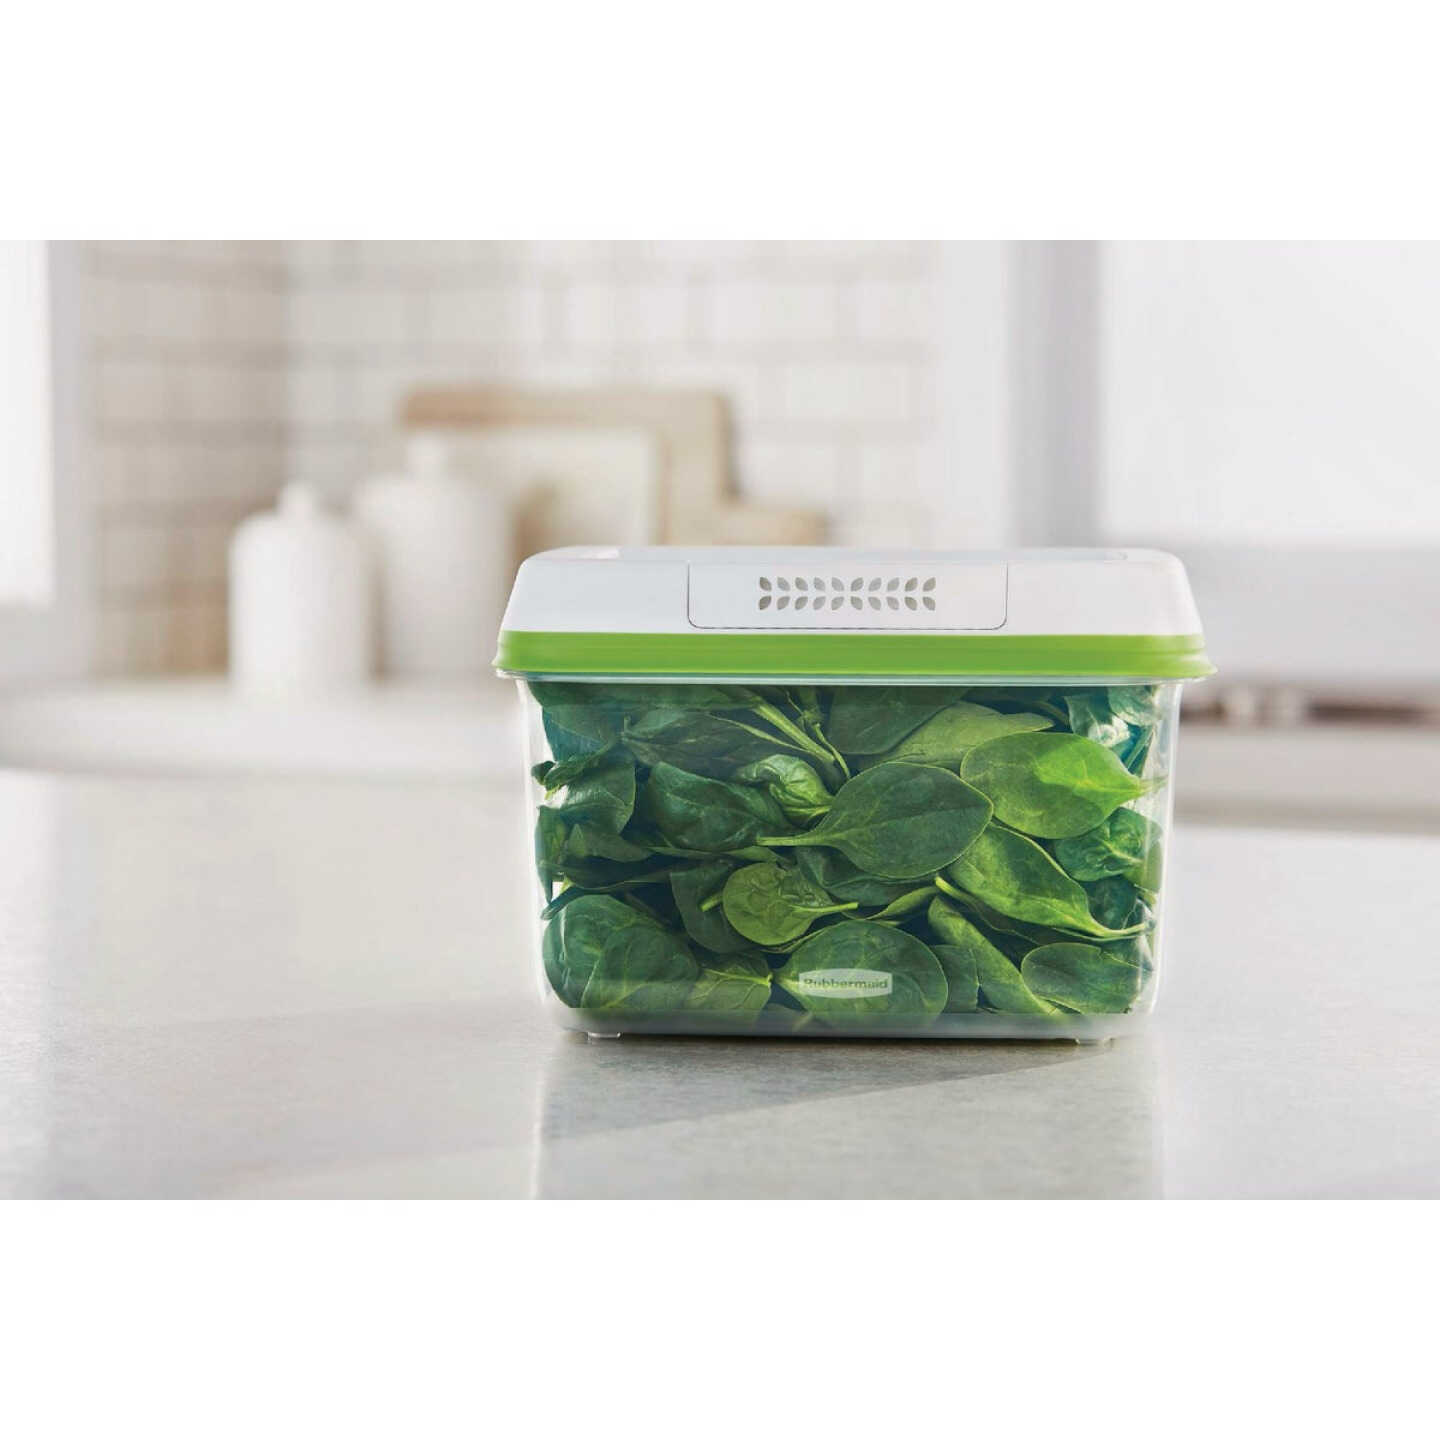 Rubbermaid FreshWorks Produce Saver, Medium and Large Storage Containers,  8-Piece Set, Clear